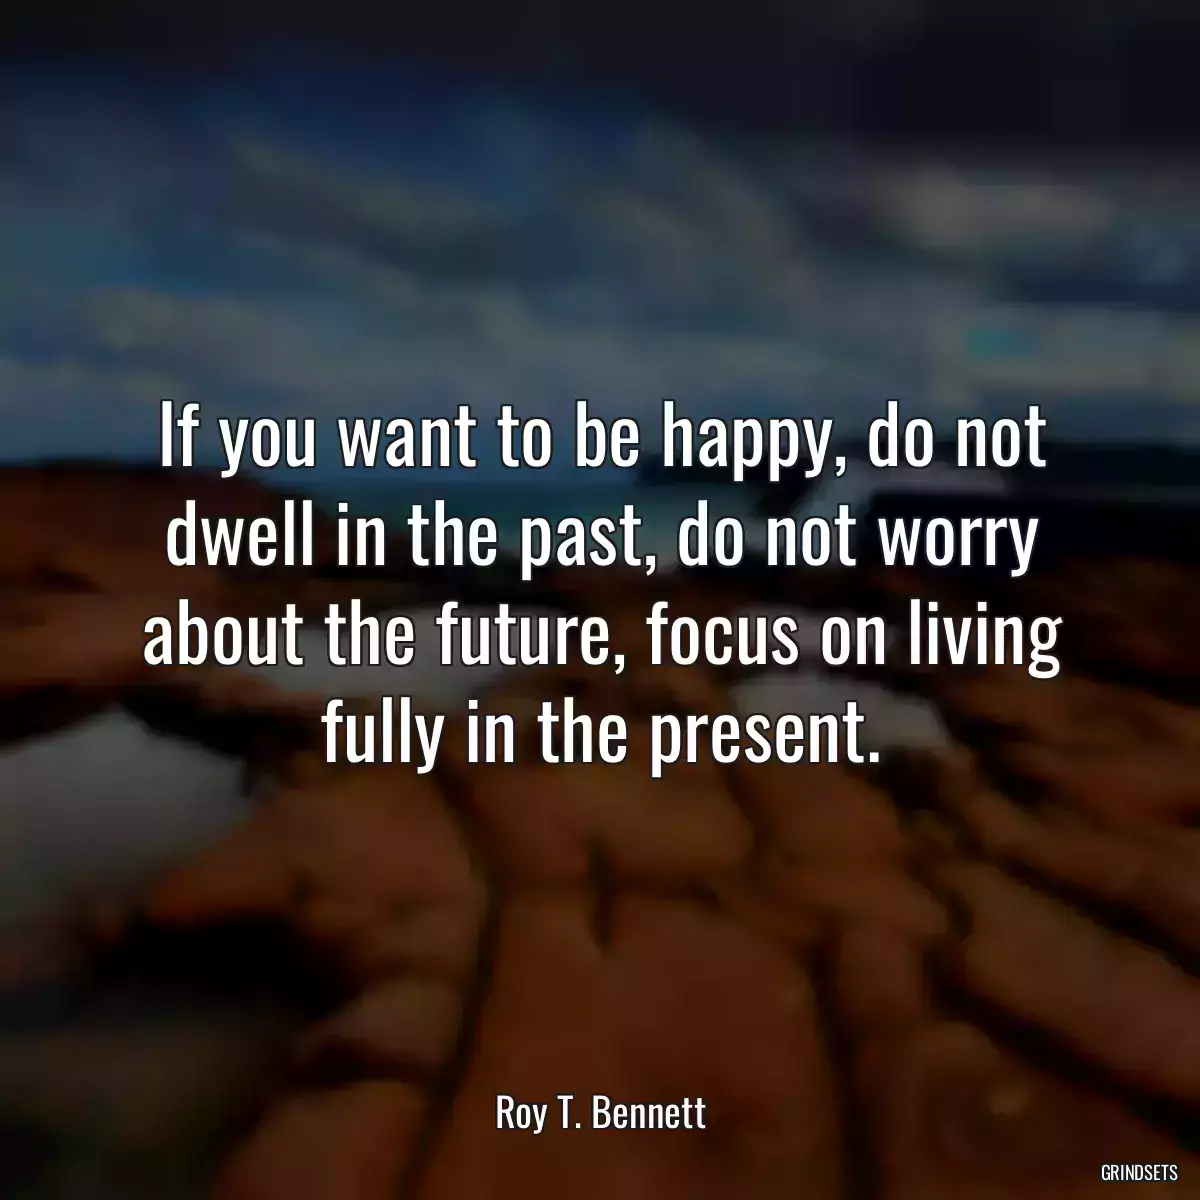 If you want to be happy, do not dwell in the past, do not worry about the future, focus on living fully in the present.